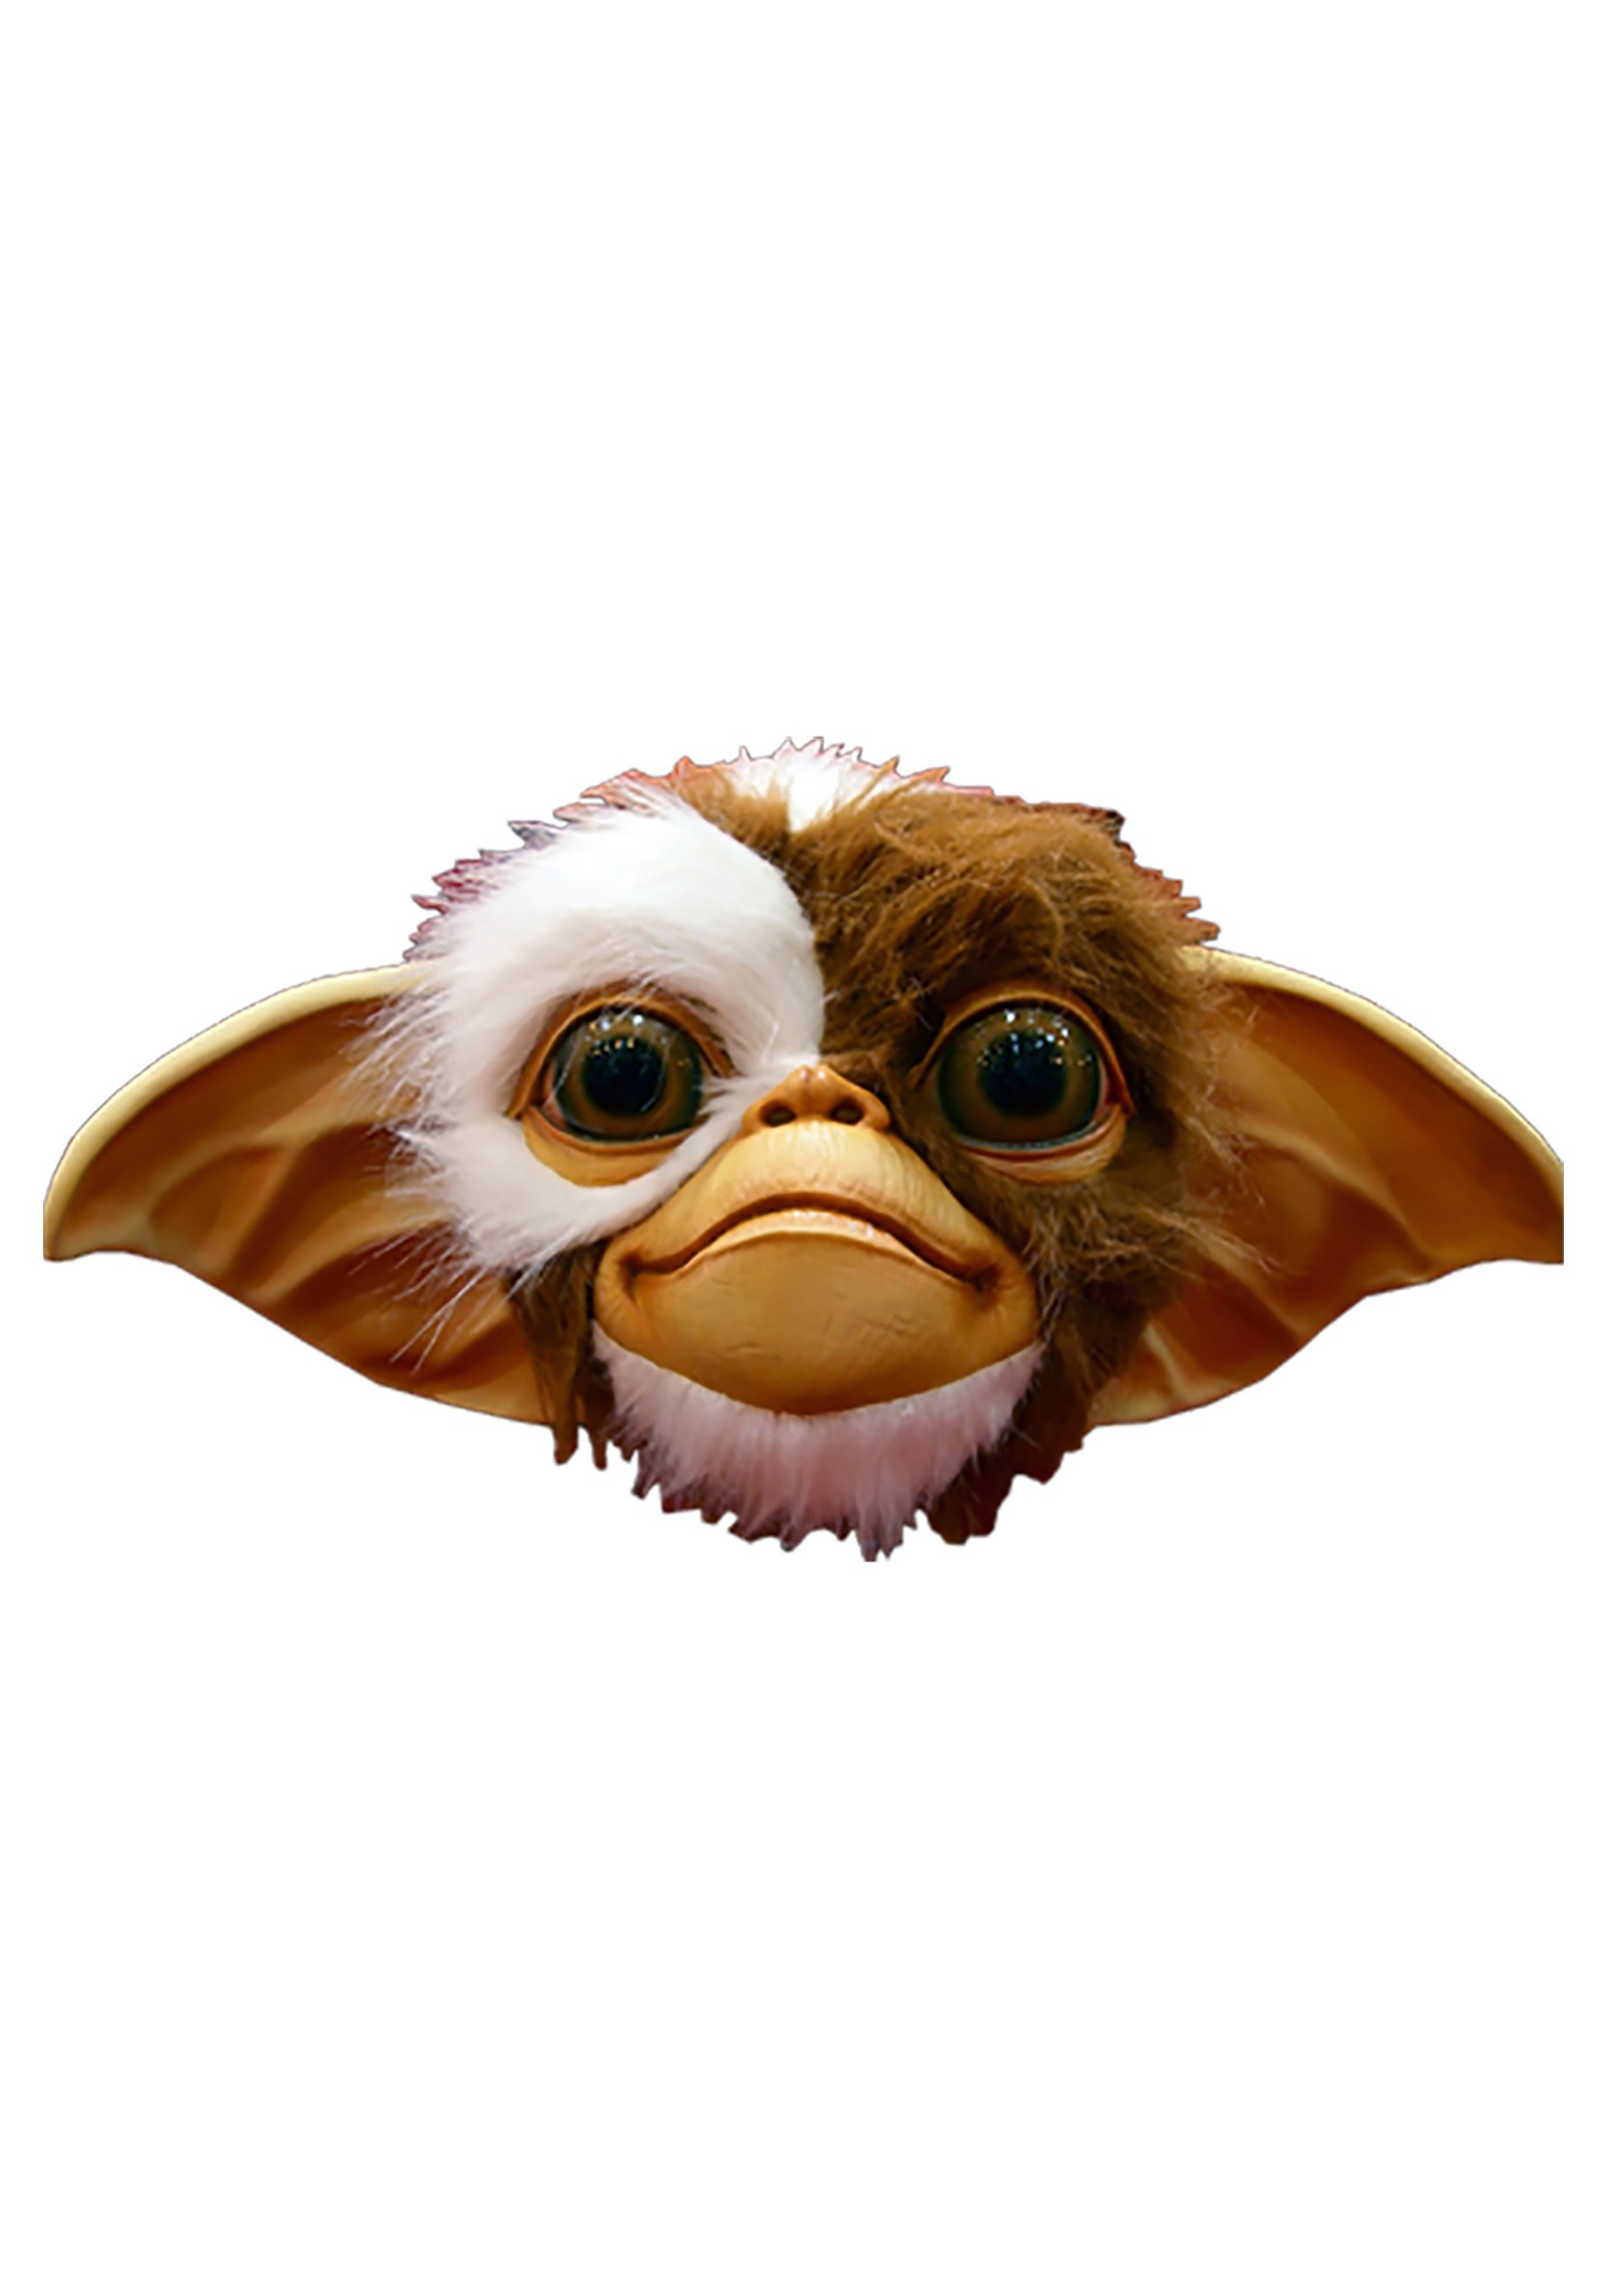 Adult Gizmo Mask from The Gremlins